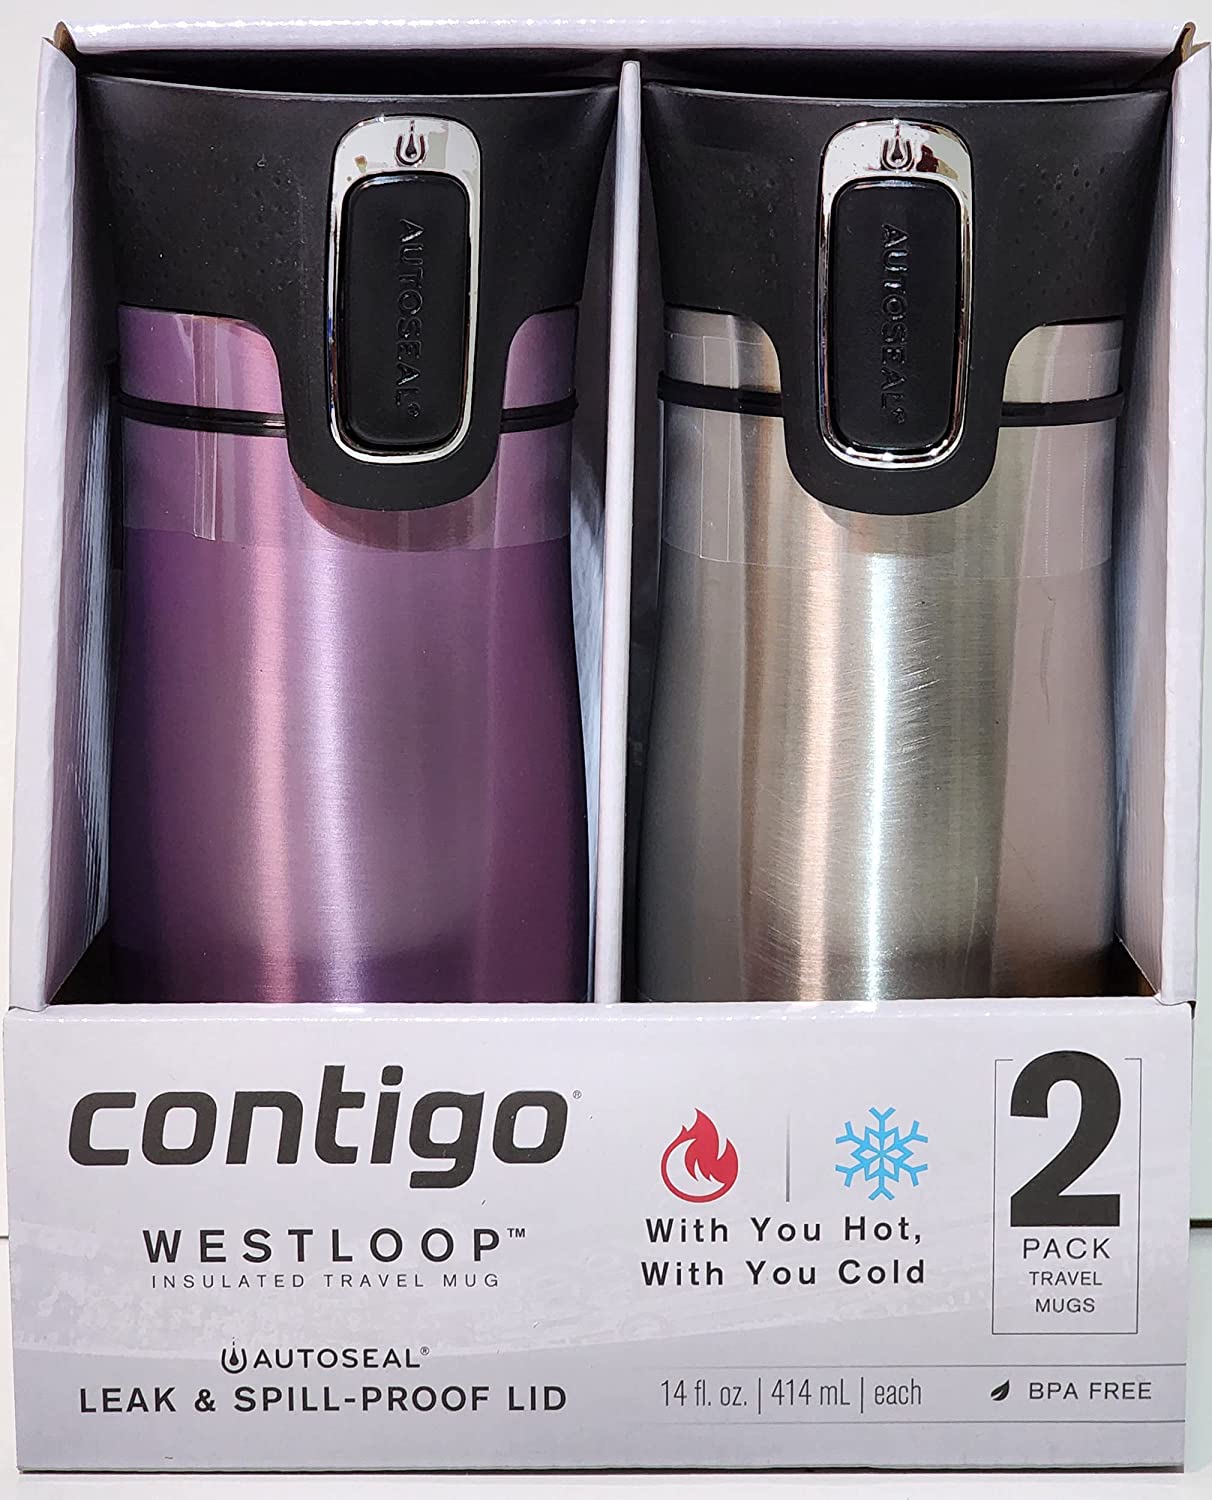 Contigo's popular AUTOSEAL West Loop Travel Mugs are starting from $9 in  today's Gold Box